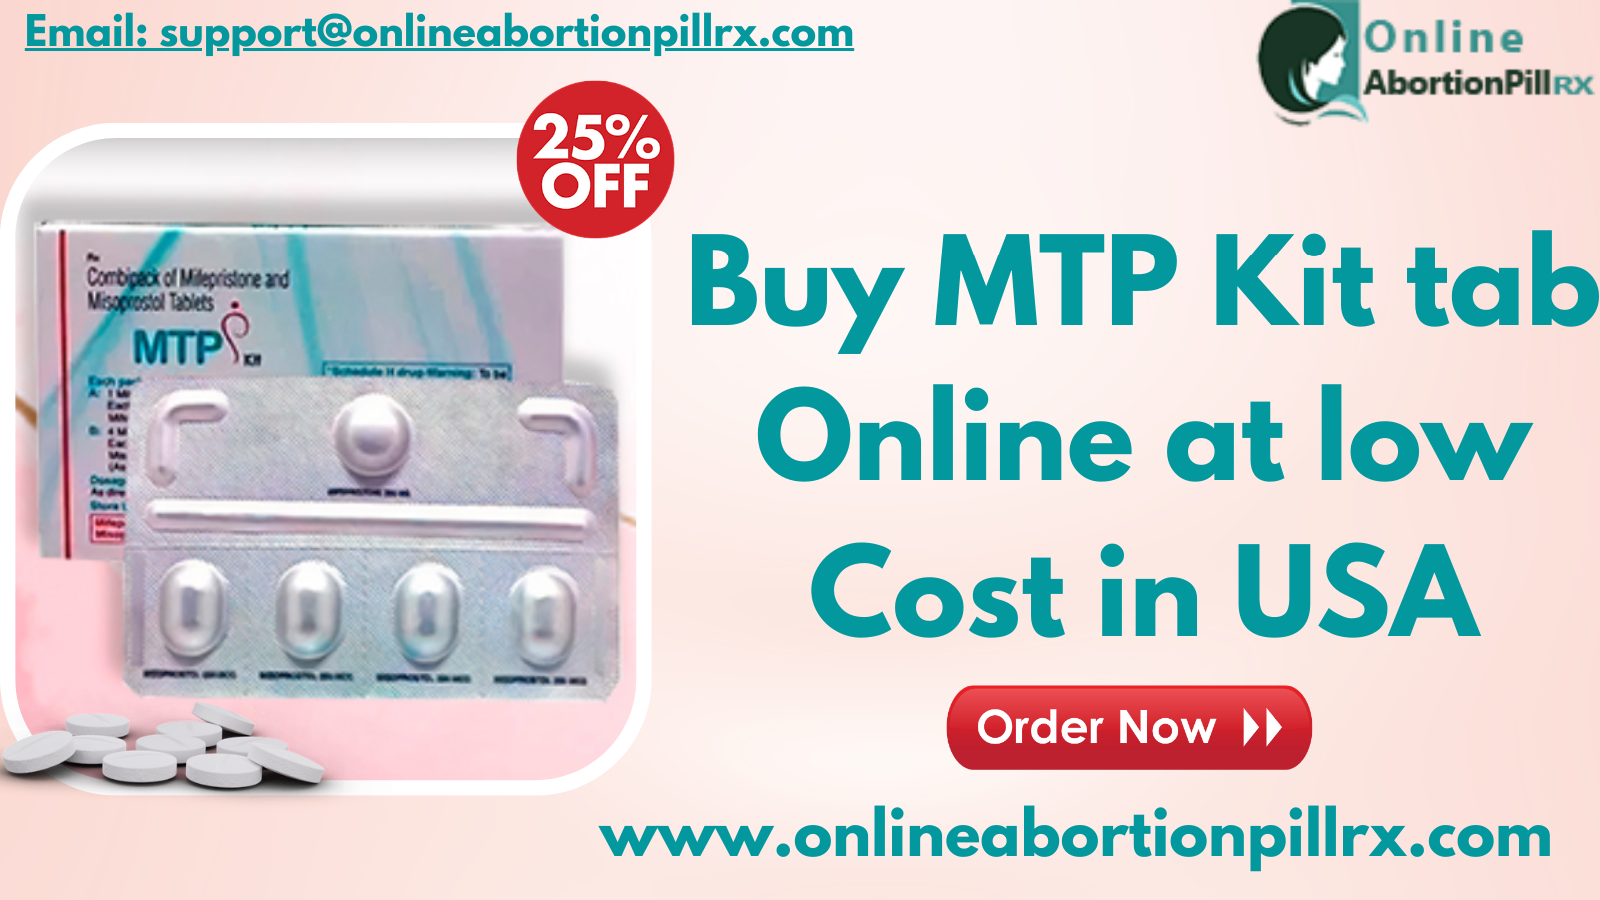  Buy MTP Kit tab Online at low Cost in USA  - Alabama - Huntsville ID1538588